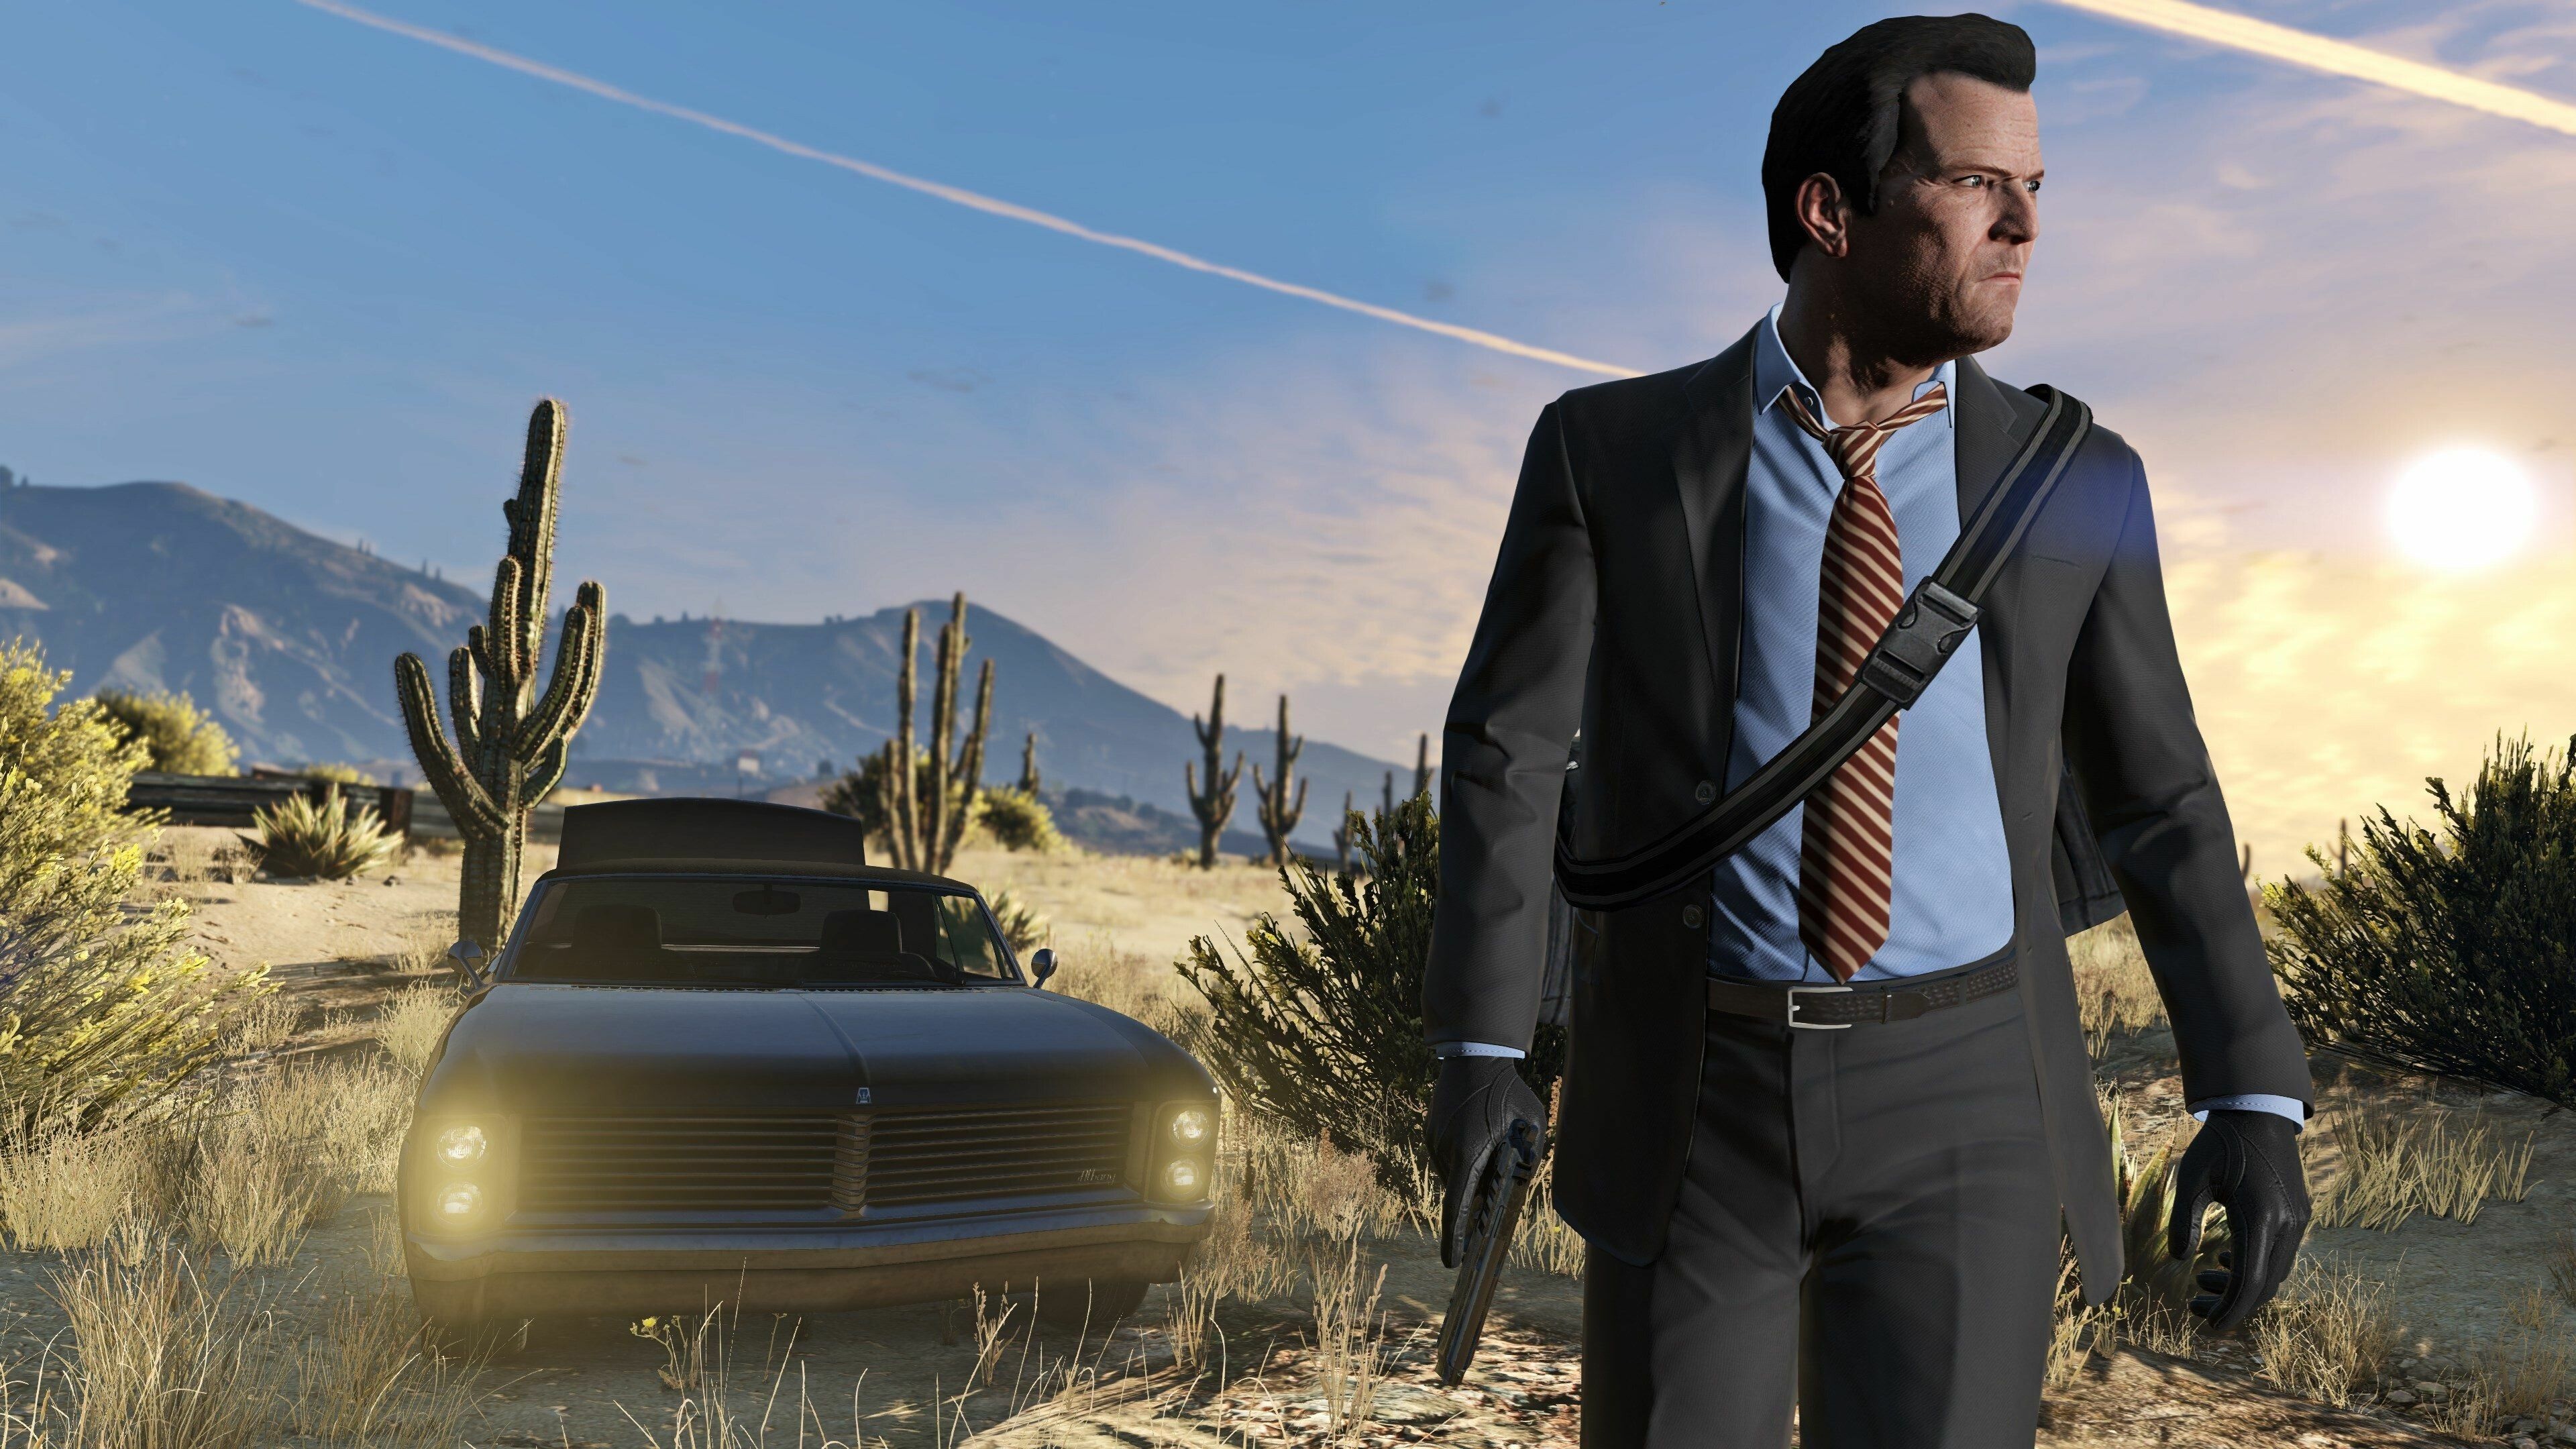 4K GTA 5 Wallpaper: HD, 4K, 5K for PC and Mobile. Download free image for iPhone, Android